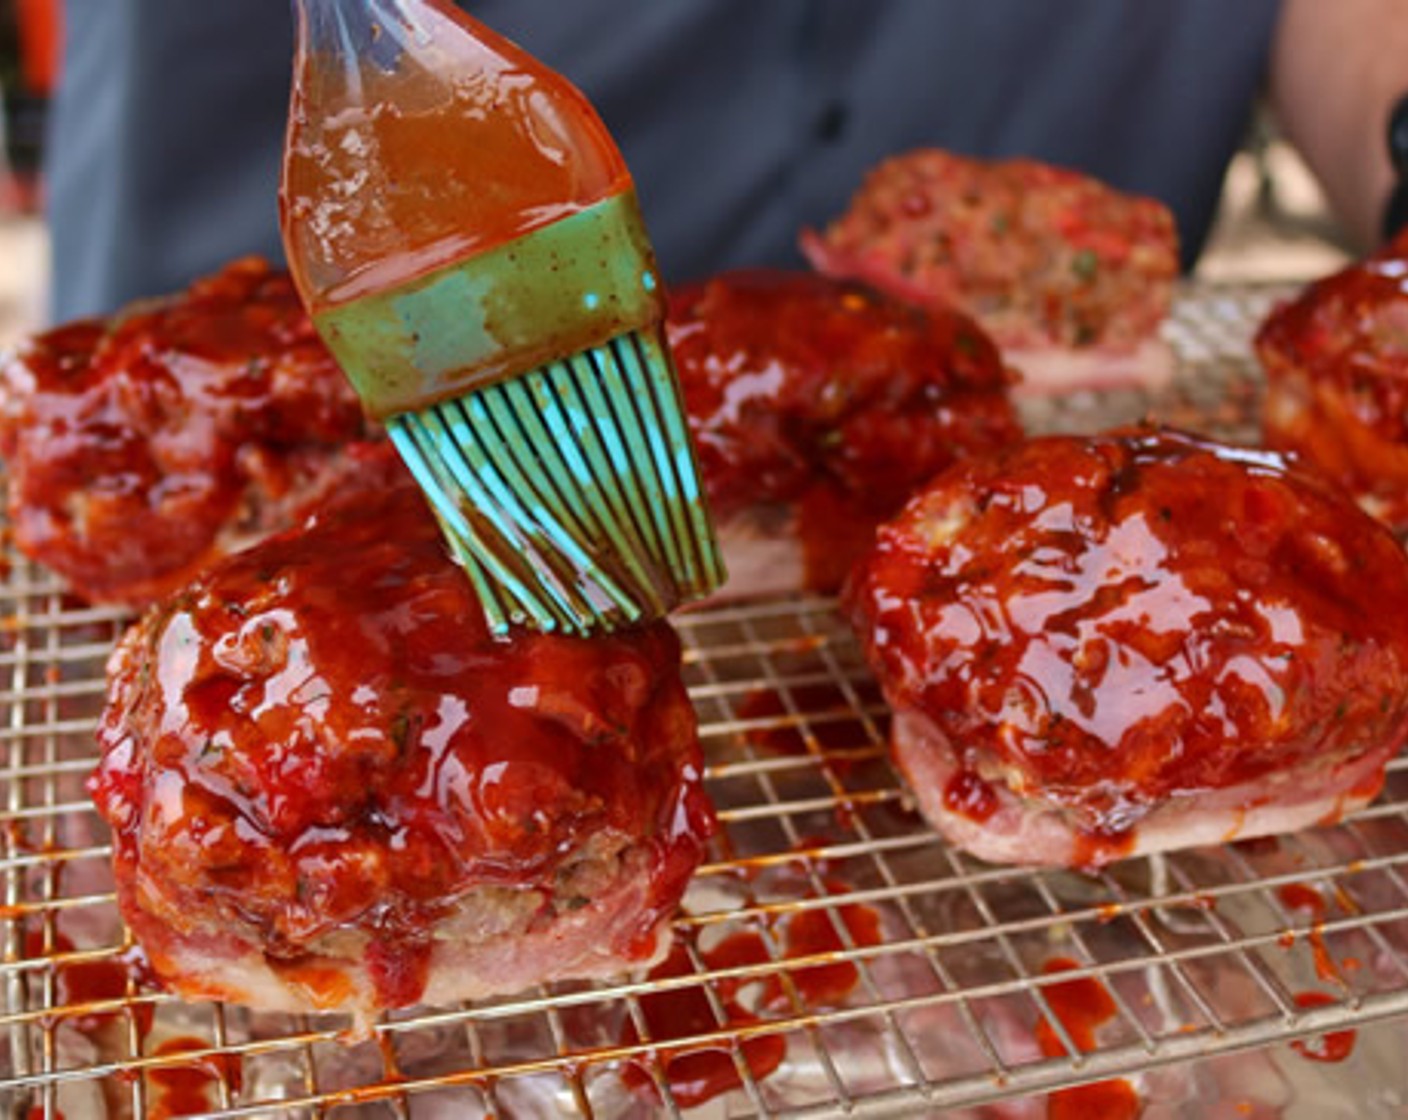 step 8 Carefully remove each mini meat loaf from pan and place on wire rack. Glaze with warm BBQ Glaze and return to the smoker for 15 minutes or until internal temp reaches 165 degrees F (75 degrees C) minimum.